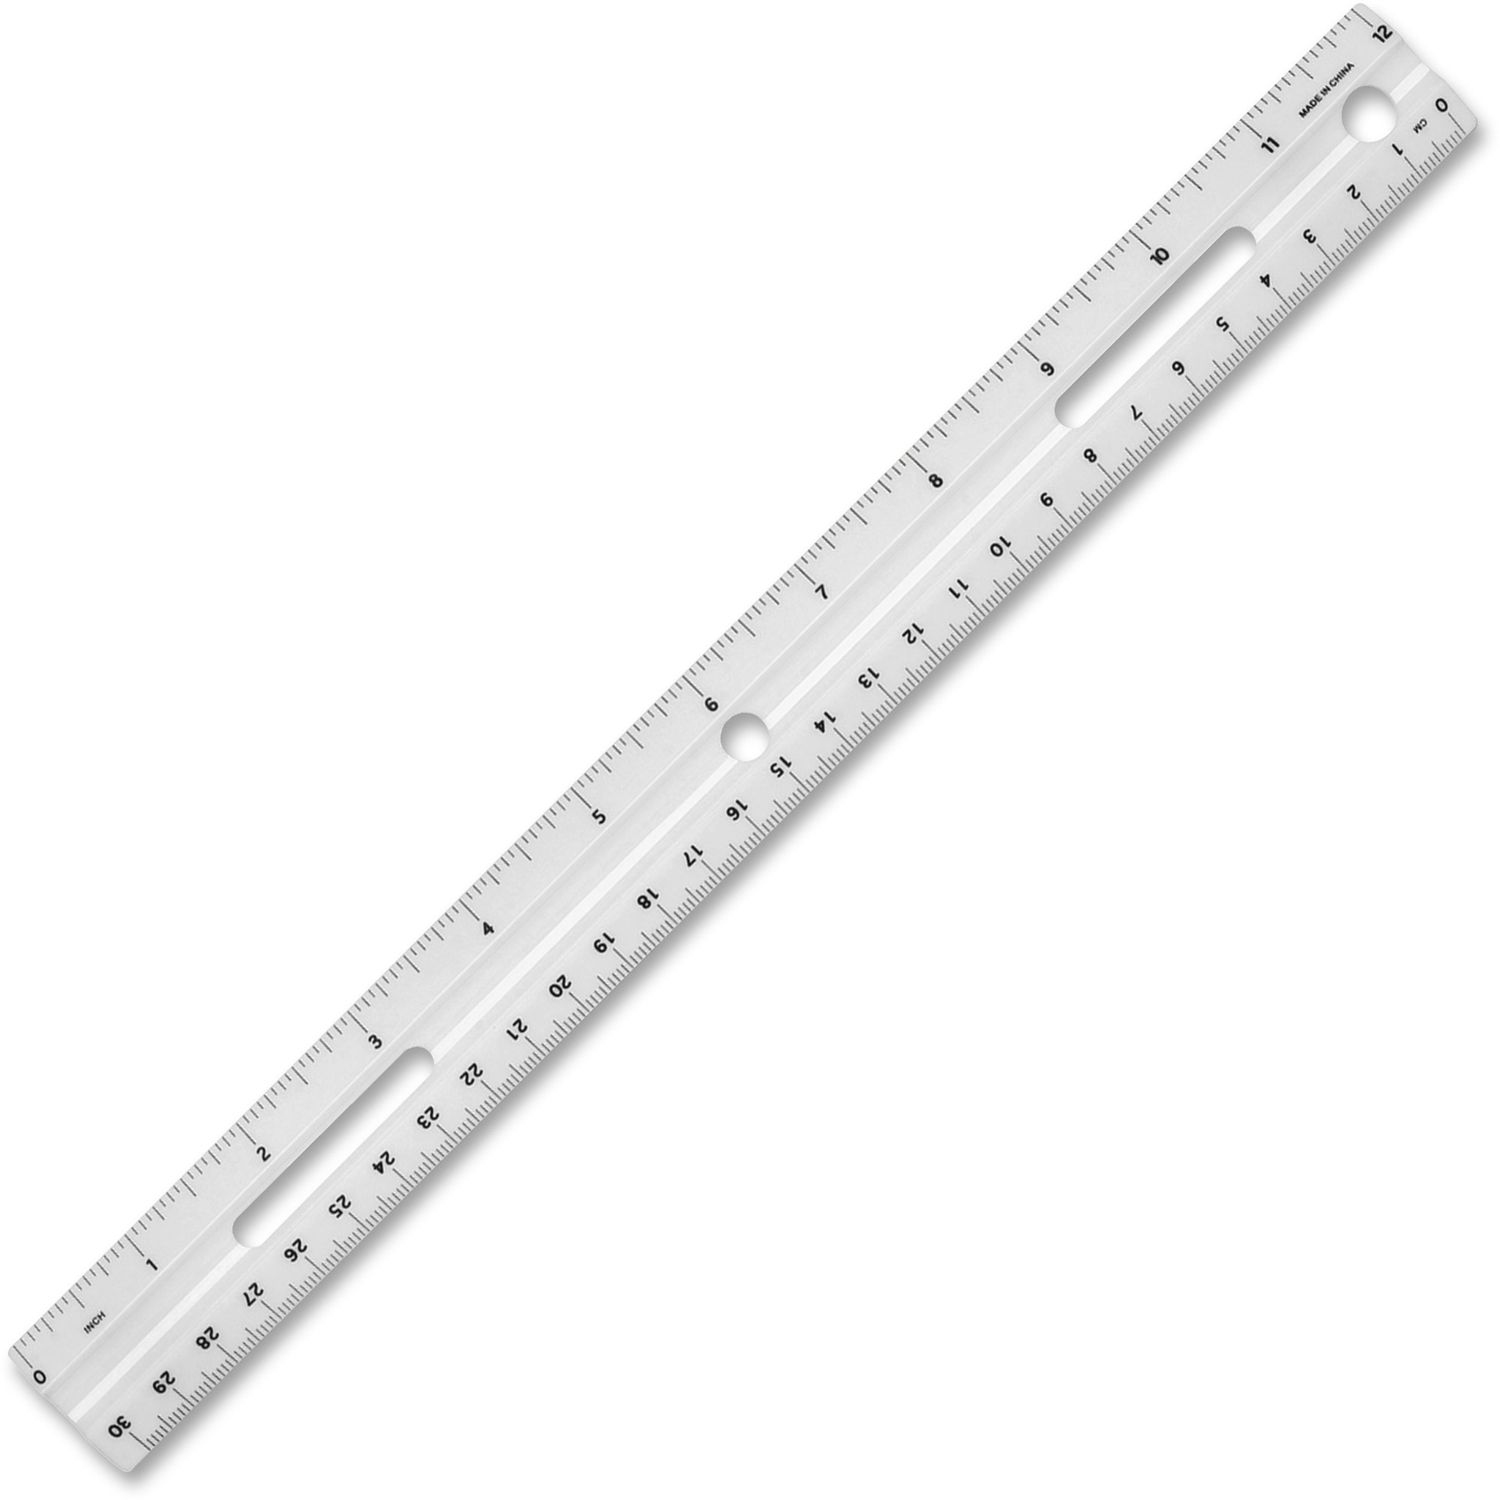 12" Plastic Ruler 12" Length 1.3" Width, 1/16 Graduations, Metric, Imperial Measuring System, Plastic, 1 Each, White